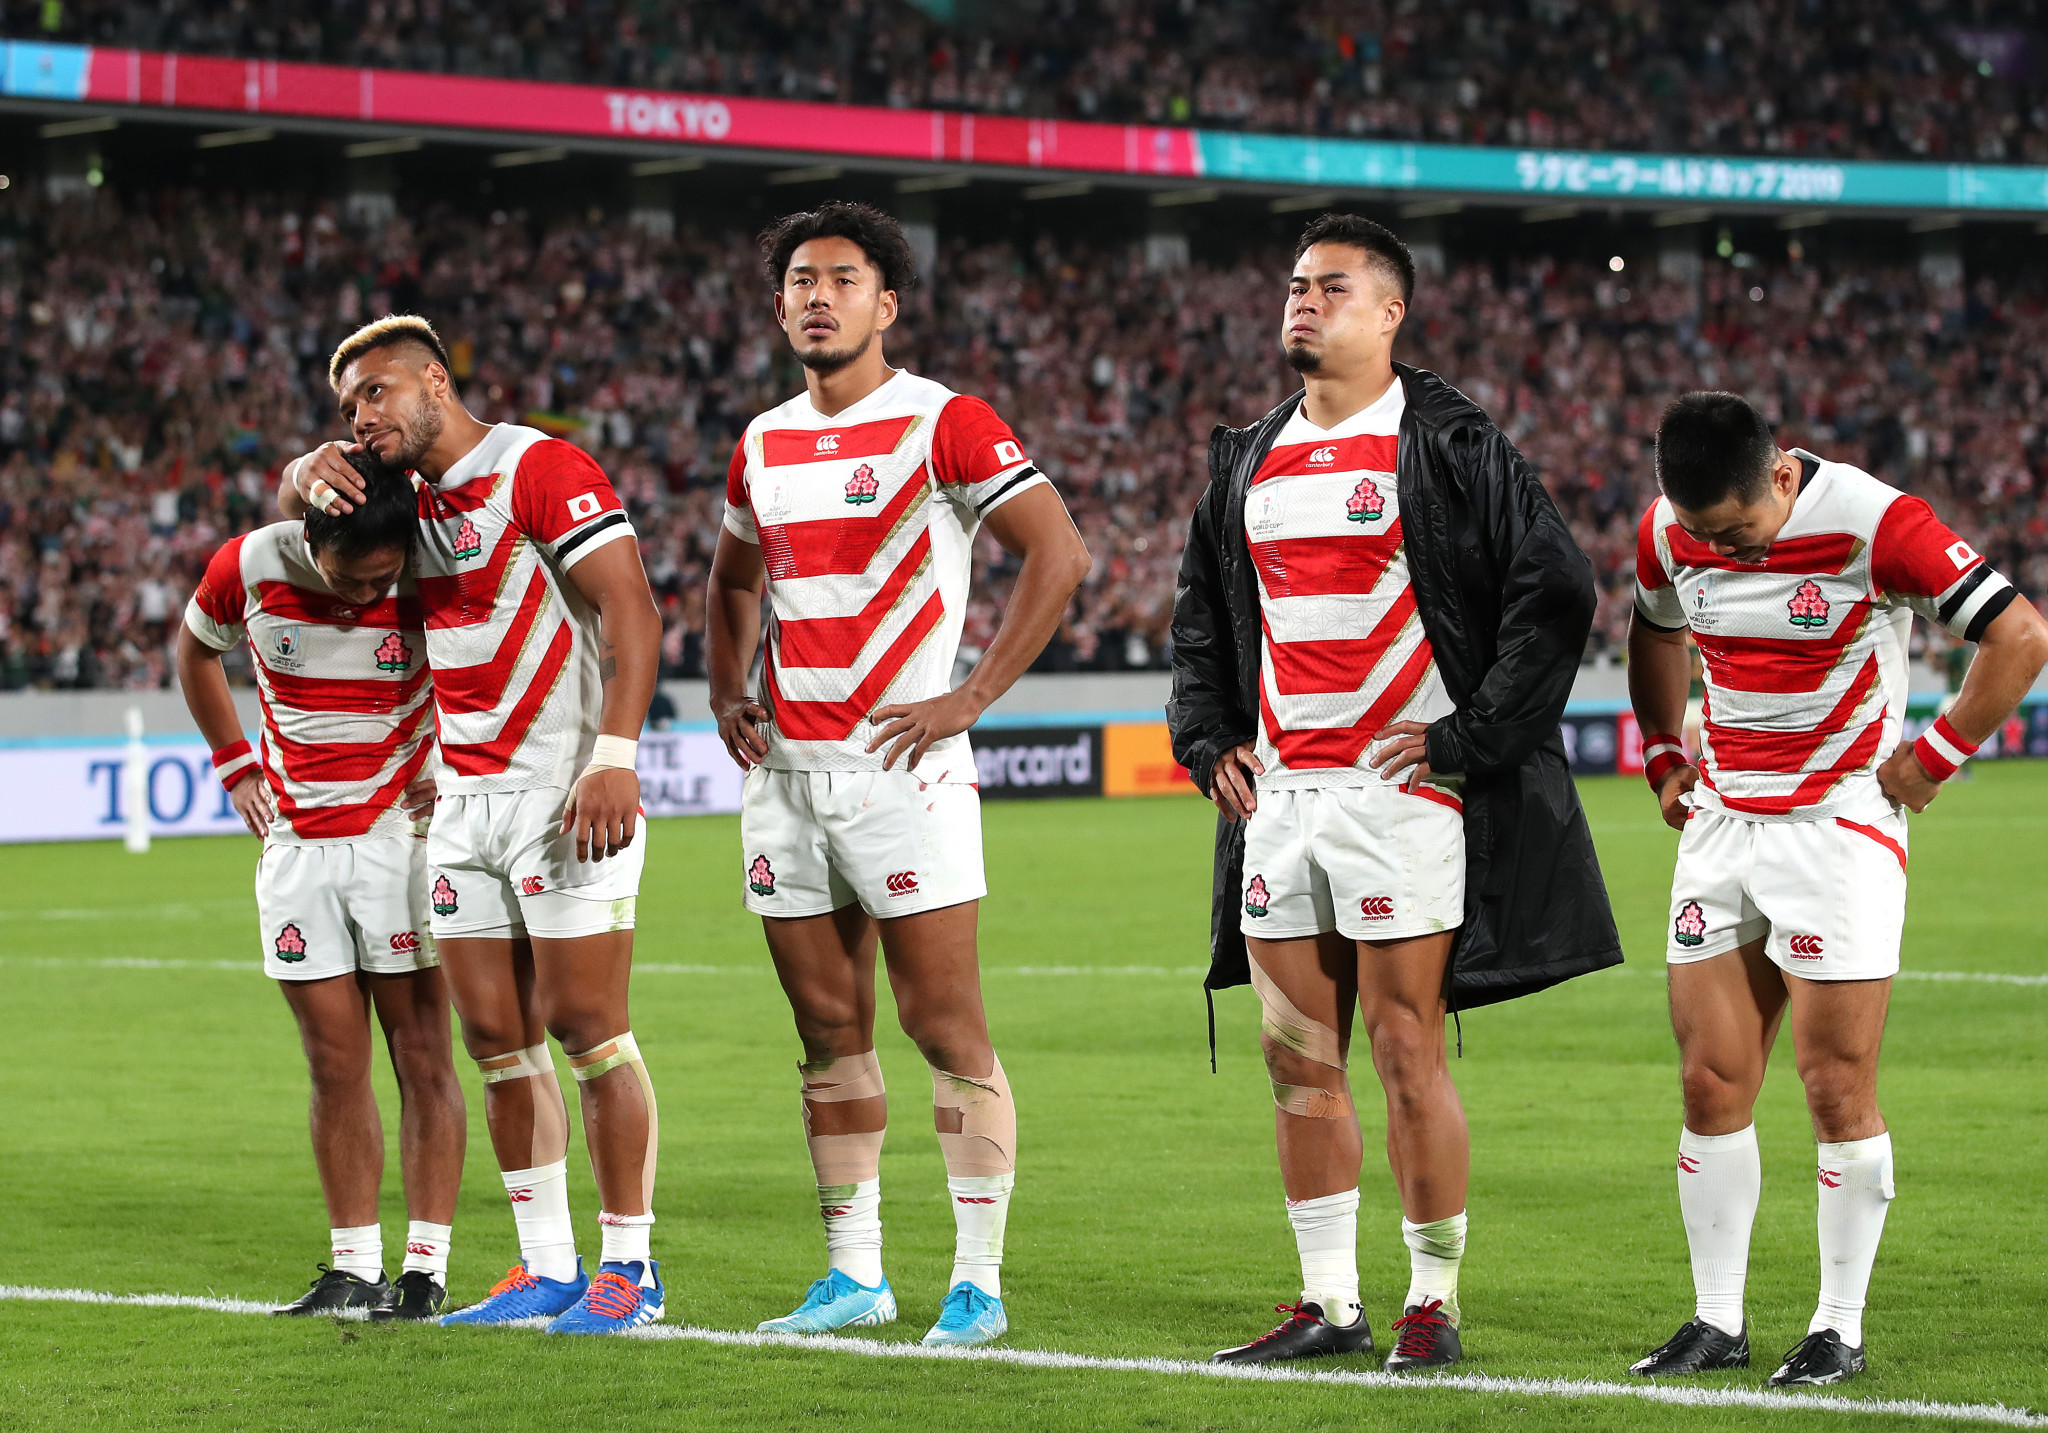 There were tears and tributes as Japan exited the Rugby World Cup ©Getty Images